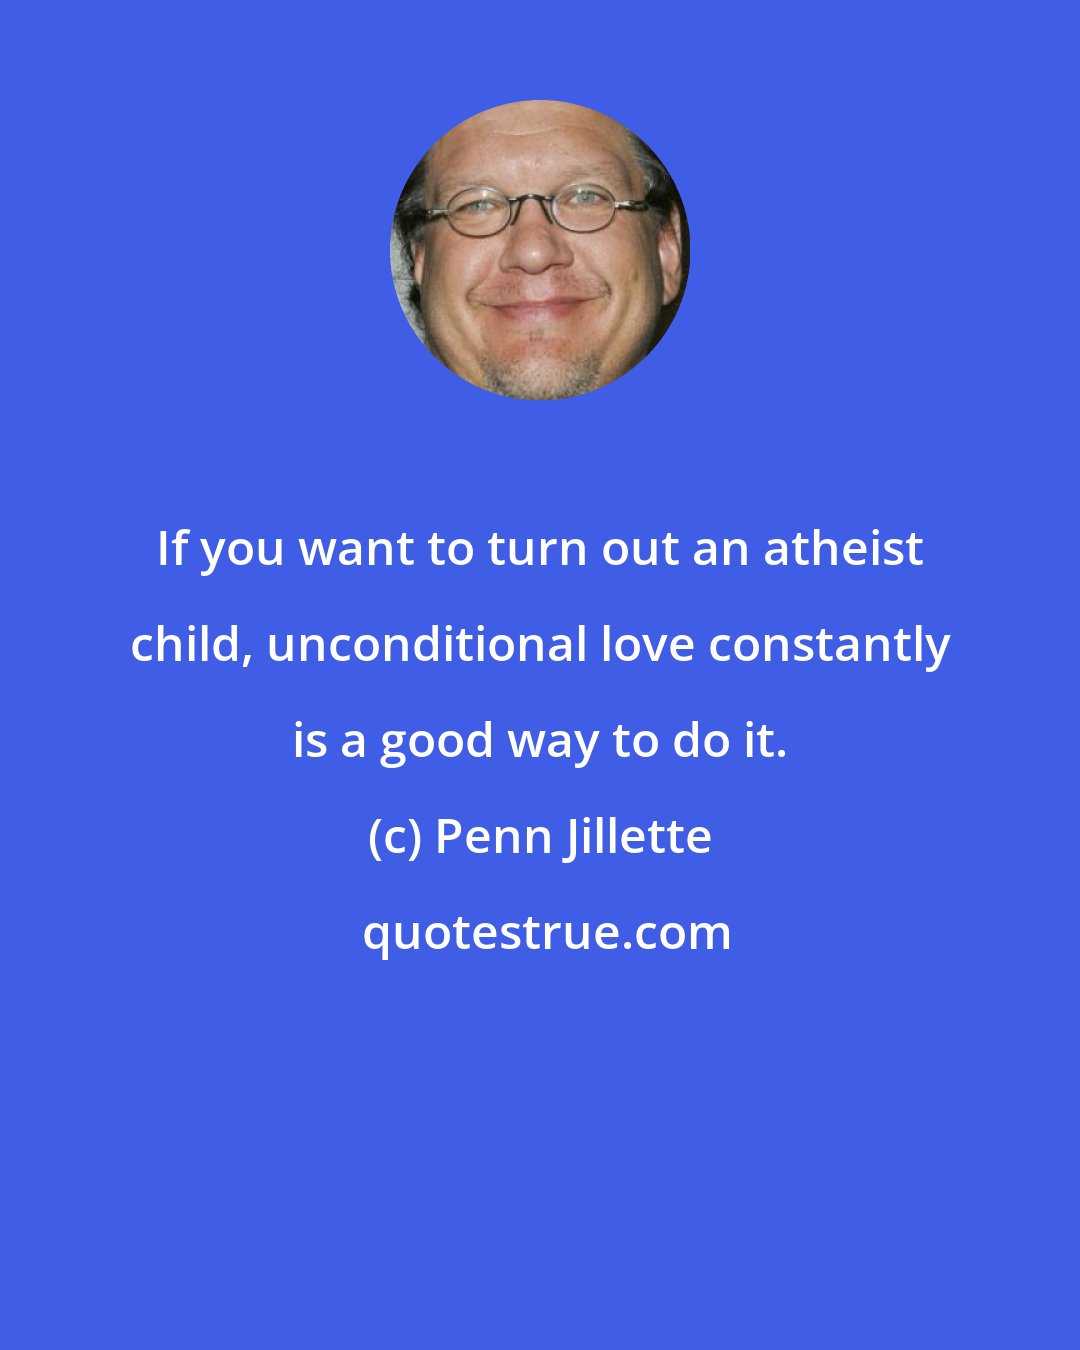 Penn Jillette: If you want to turn out an atheist child, unconditional love constantly is a good way to do it.